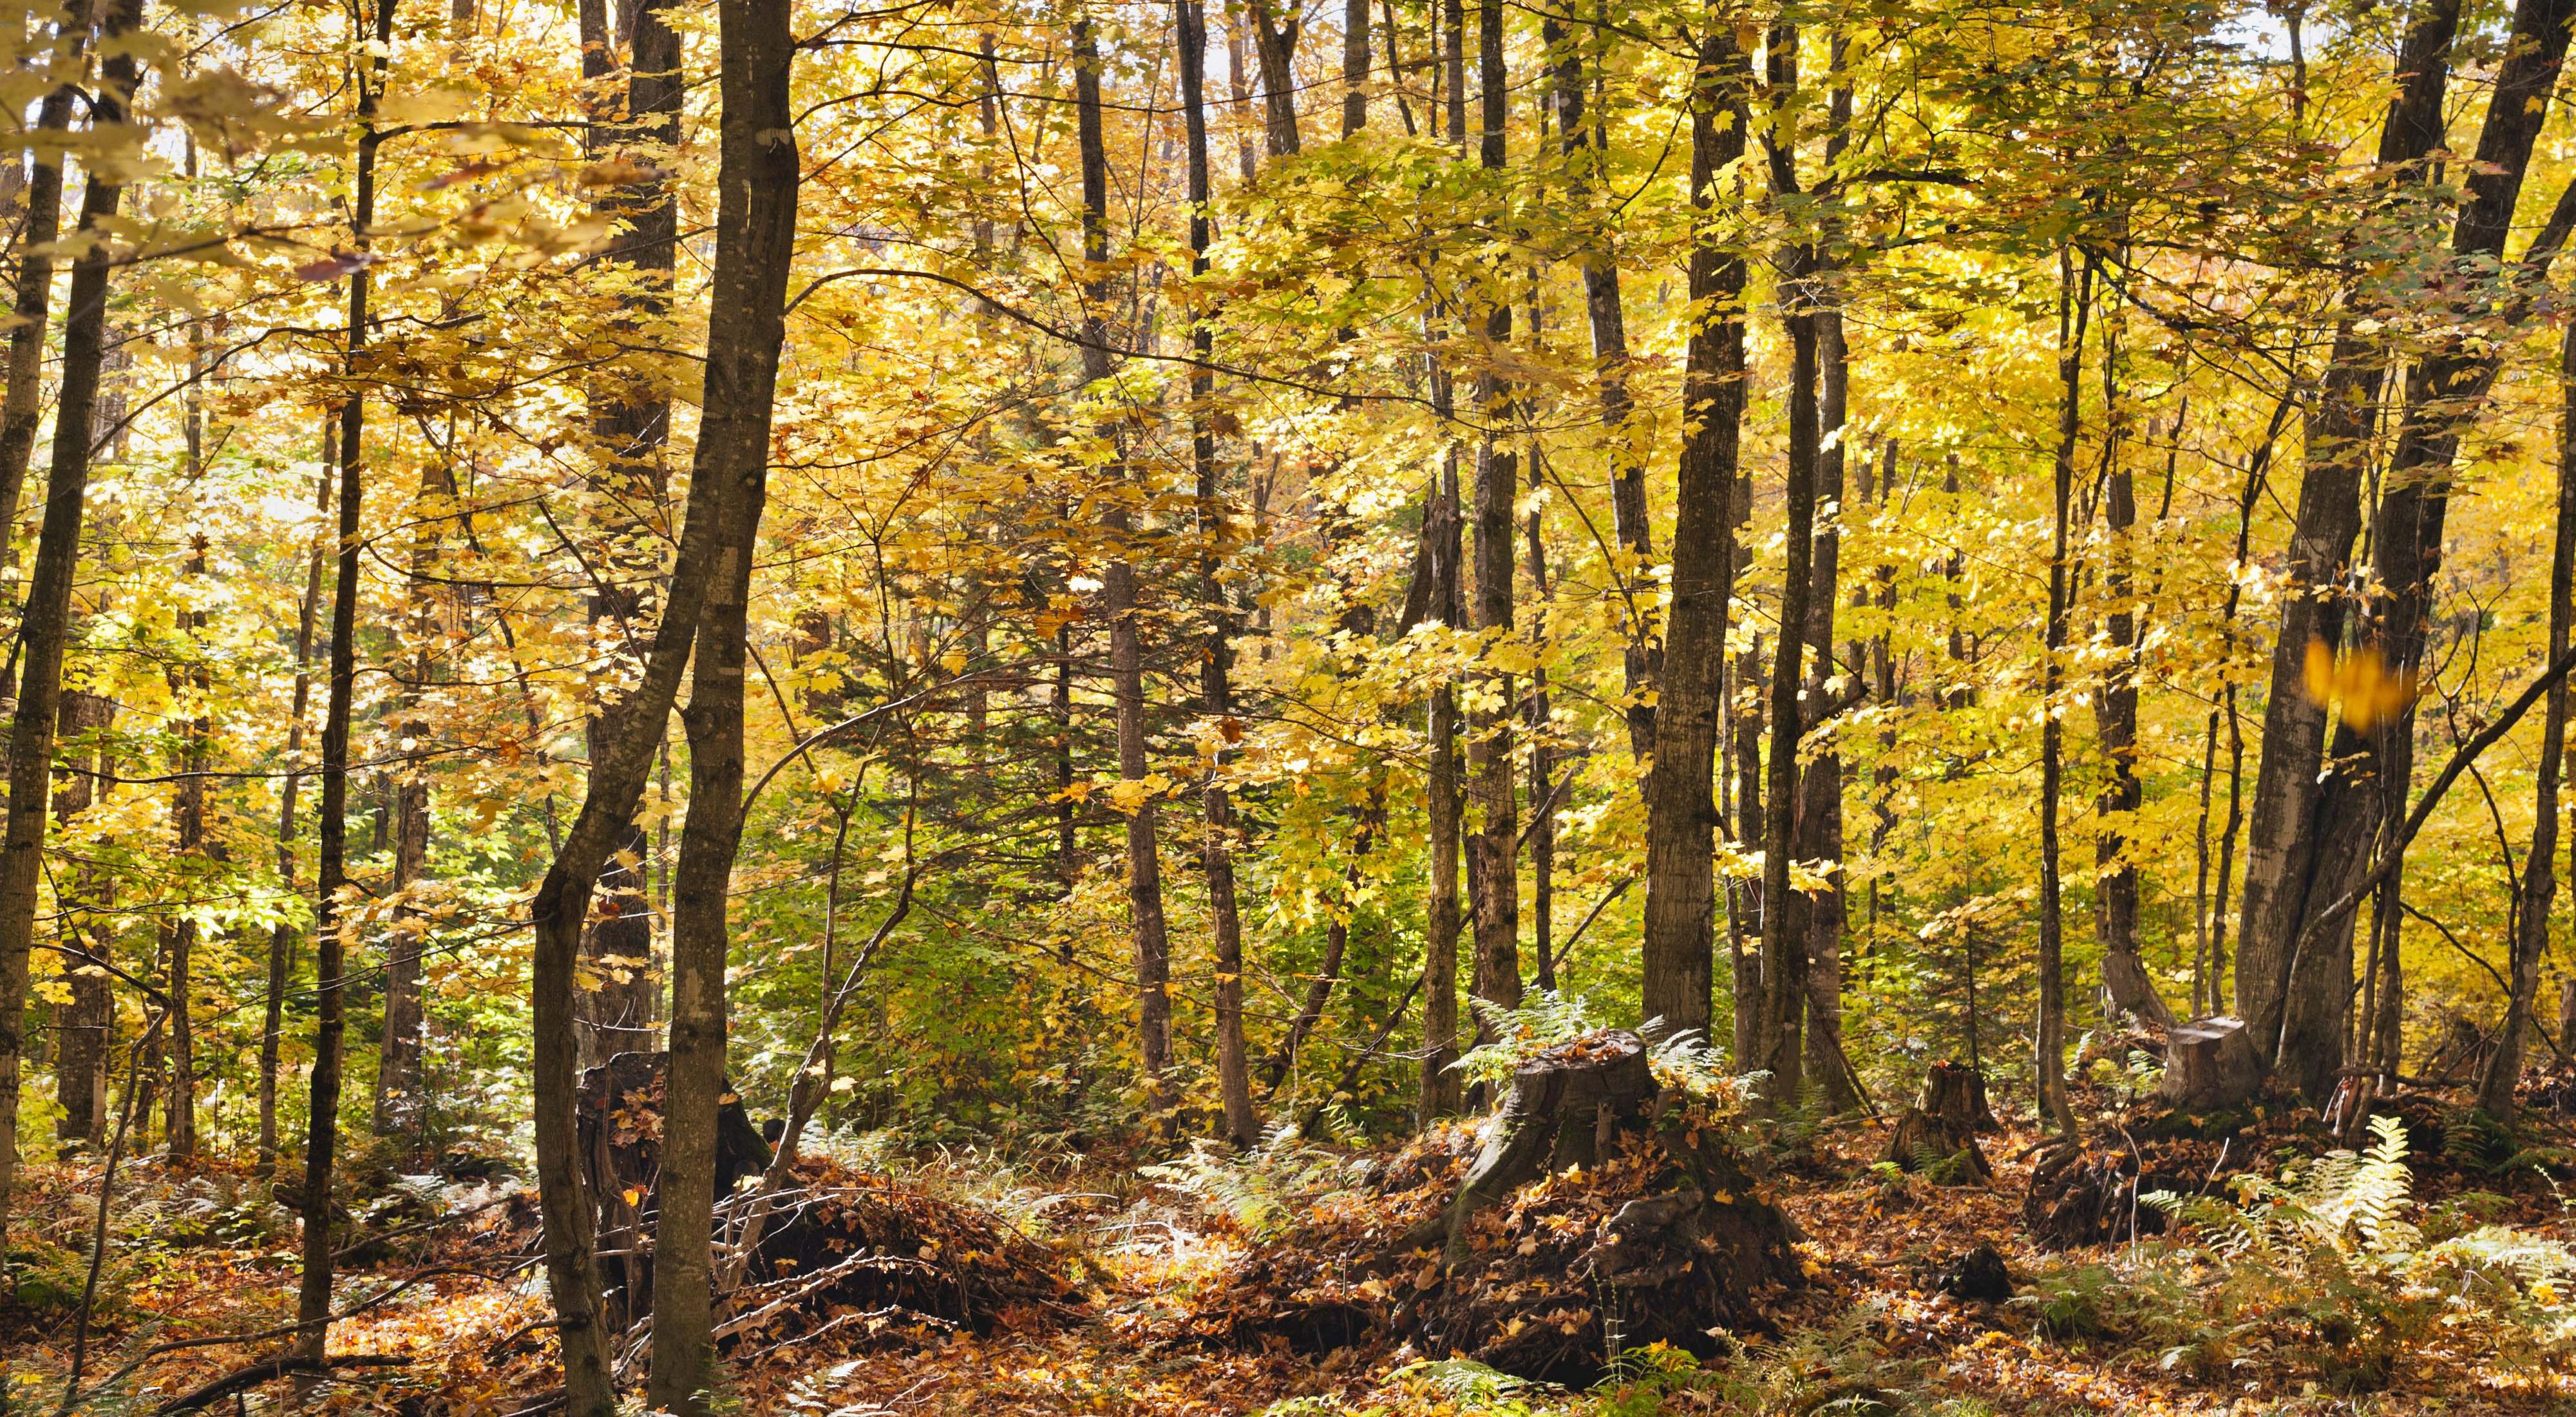 Photo of a Michigan hardwood forest in autumn colors.